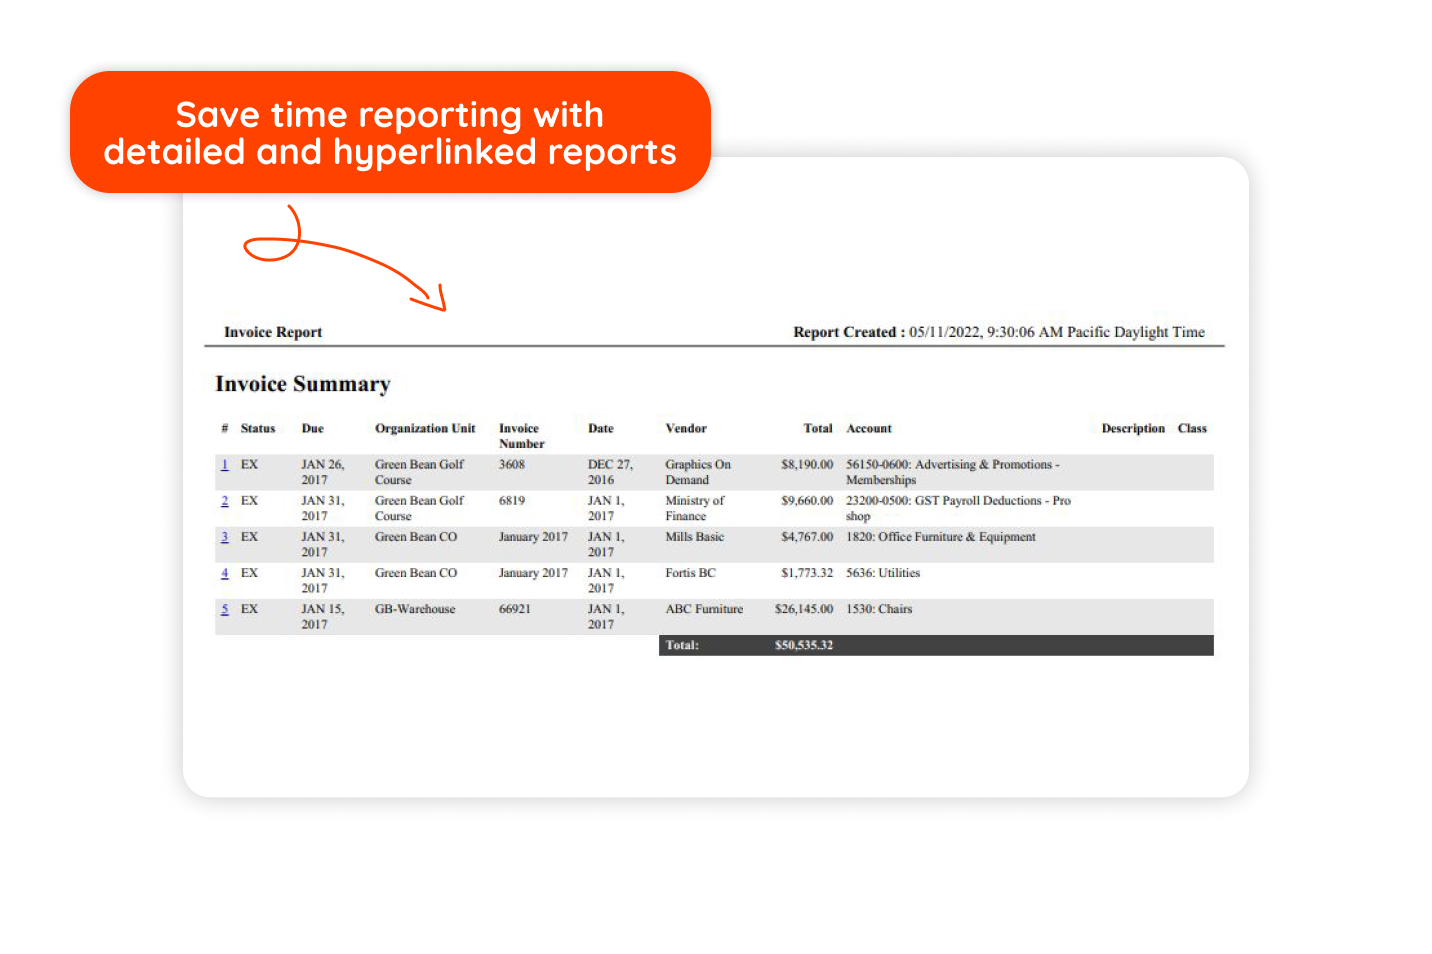 Auto Generated Reports